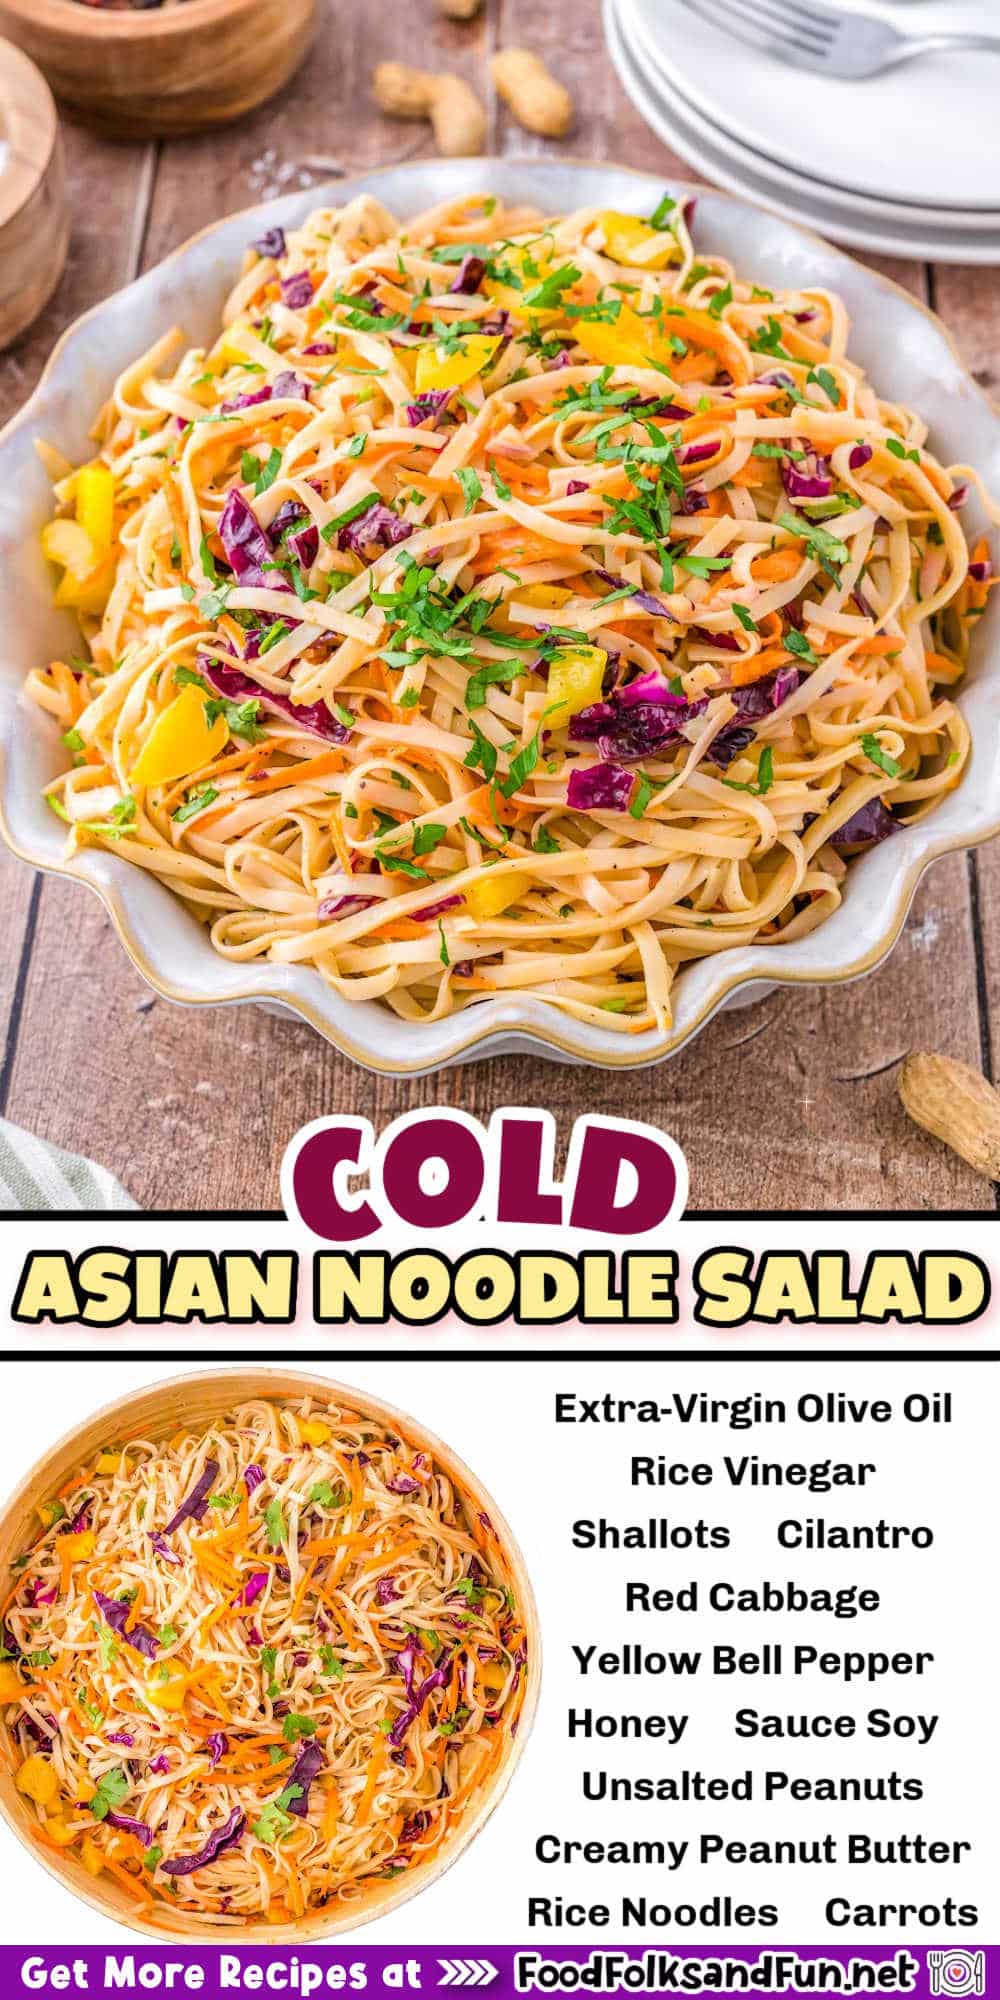 Cold Asian Noodle Salad is a refreshing dish packed with vibrant flavors and textures. It's versatile and can be customized with various proteins and veggies. via @foodfolksandfun